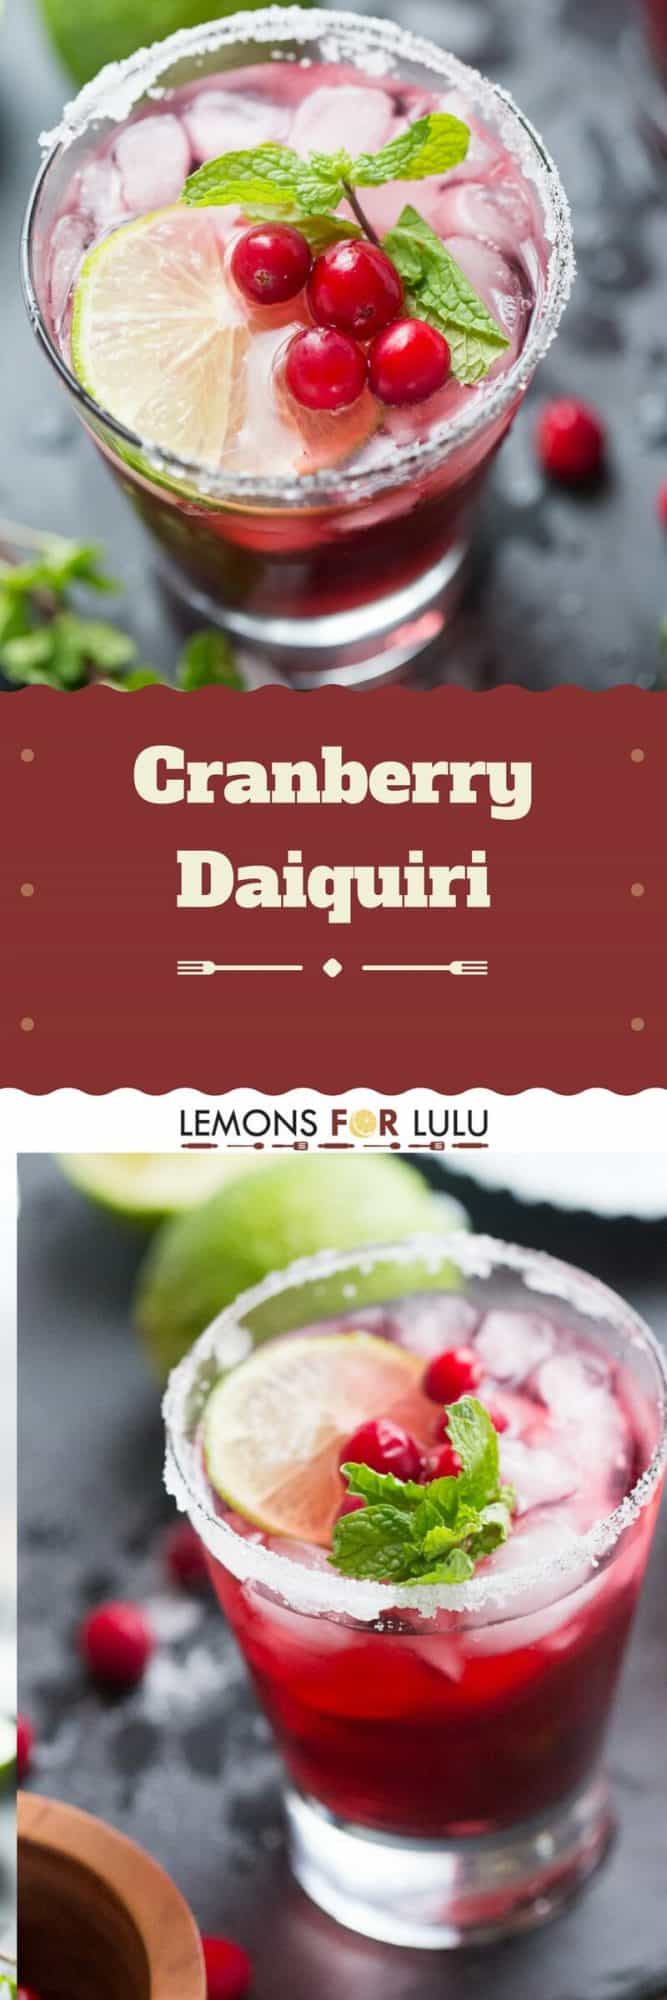 Want to liven up your party? Serve up this cranberry daiquiri for a unique and festive cocktail!